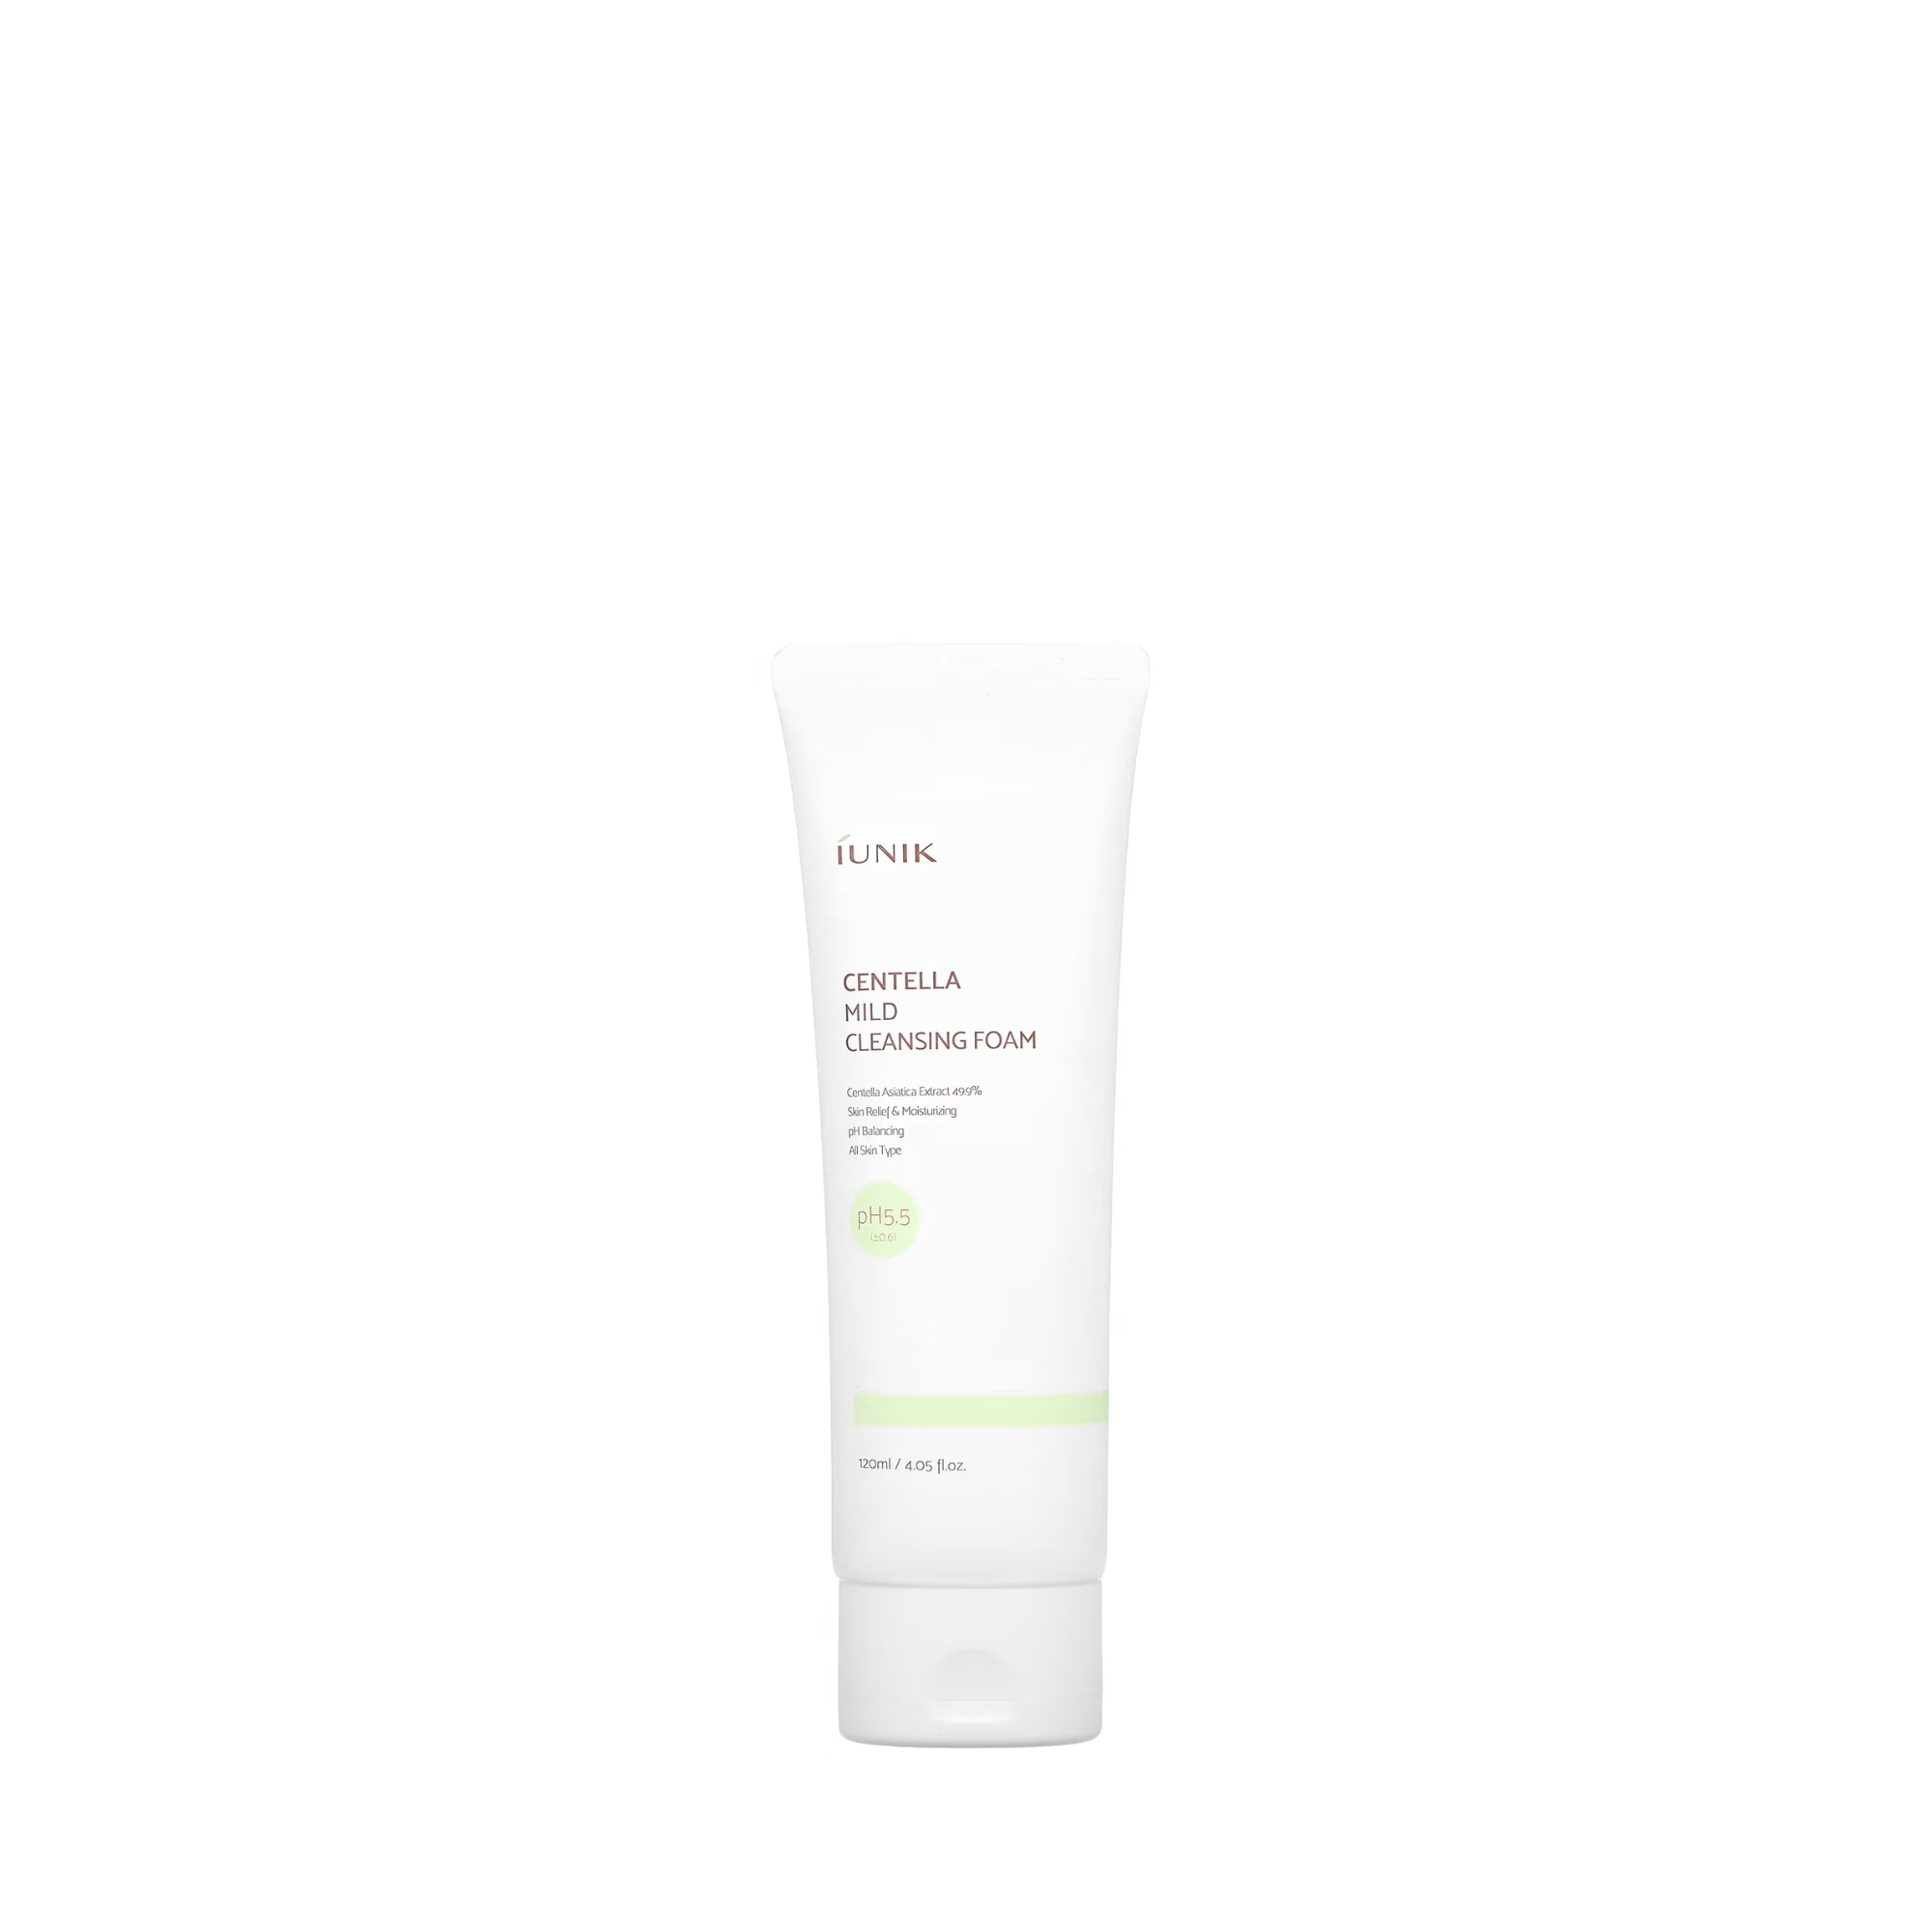 Soft cleansing foam with centella by Iunik (Iunik Centella Mild Cleansing Foam)